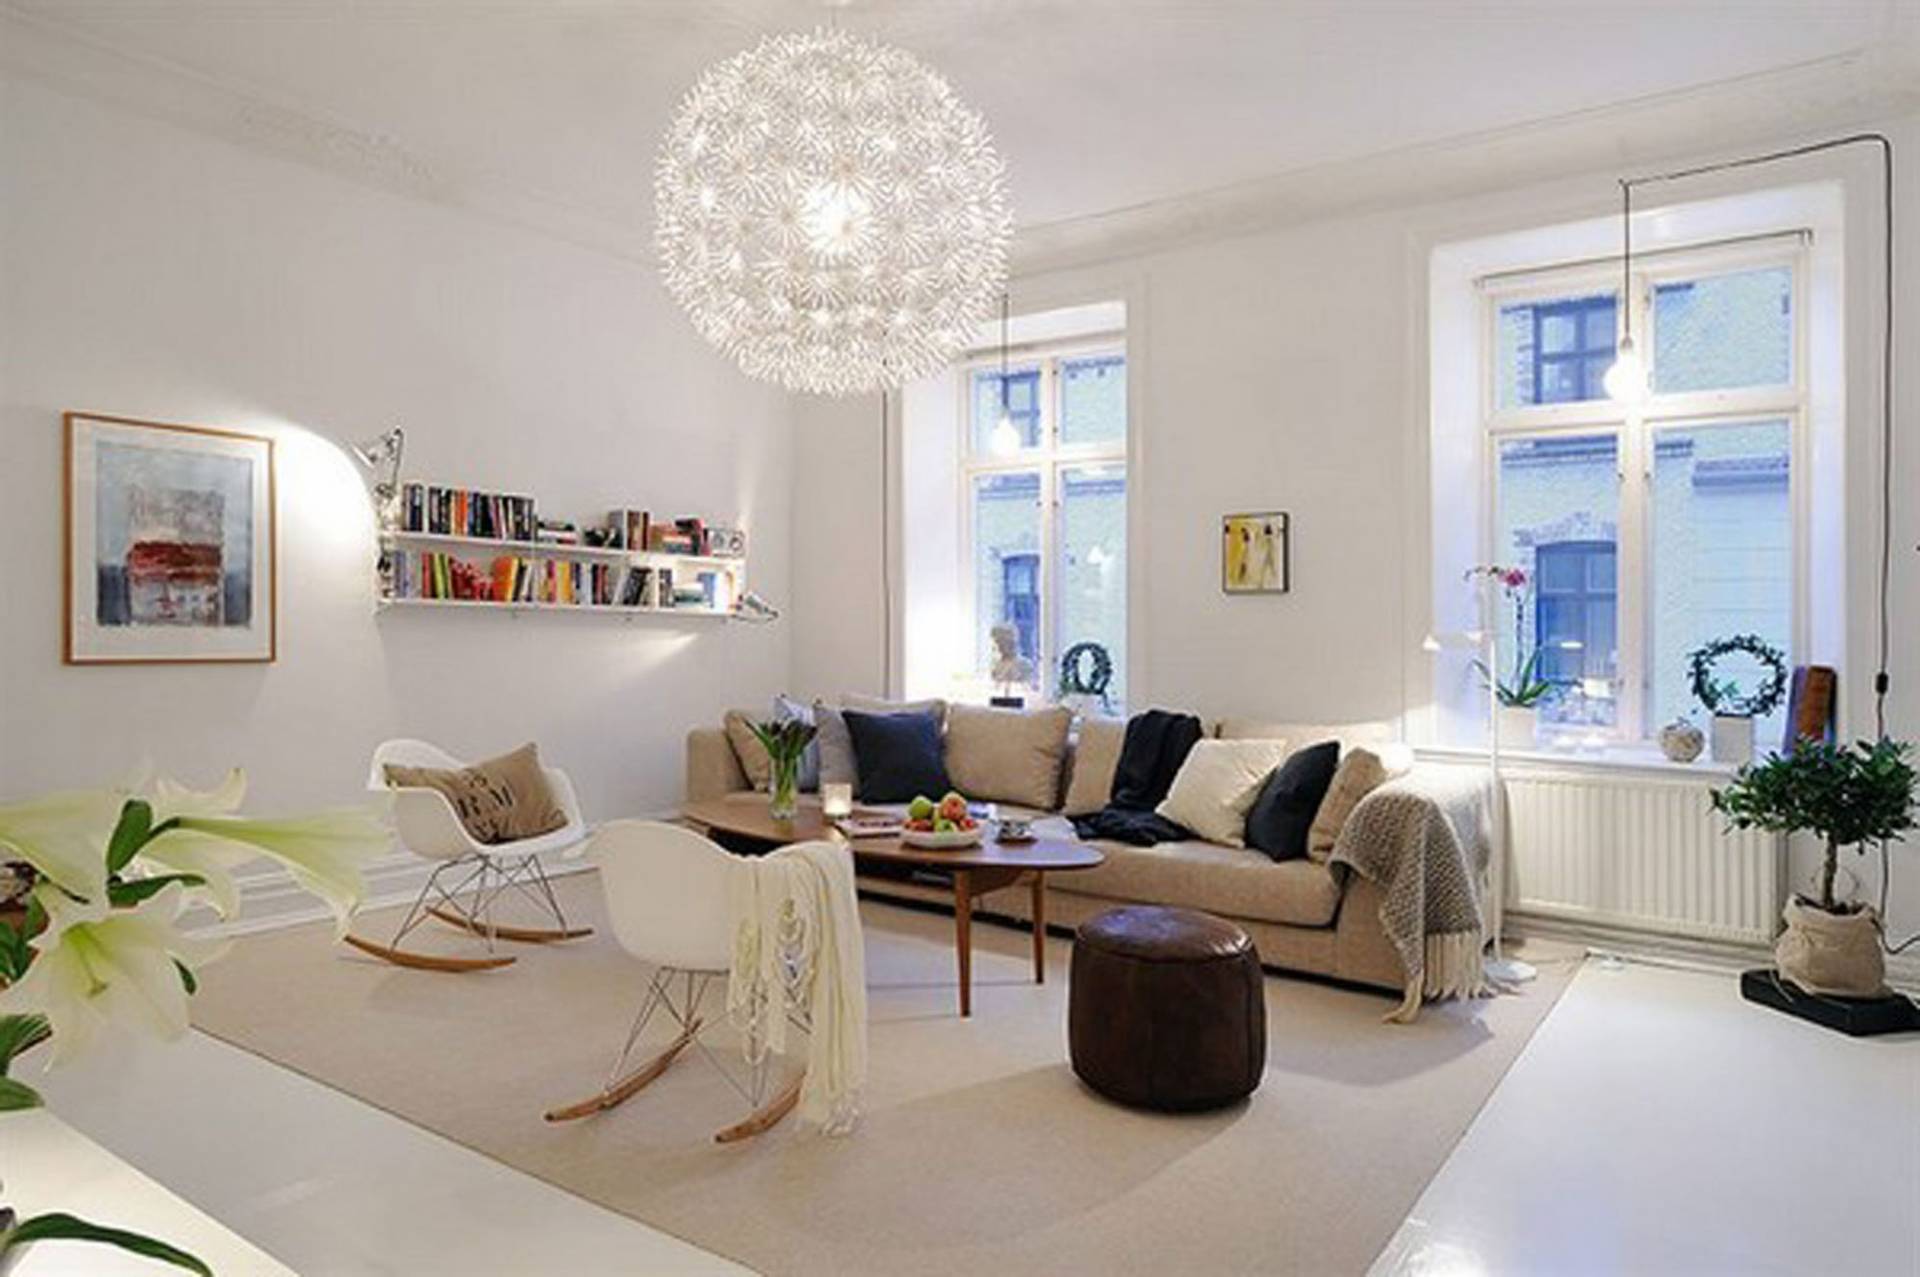 White brings elegance and warmth to the living room.